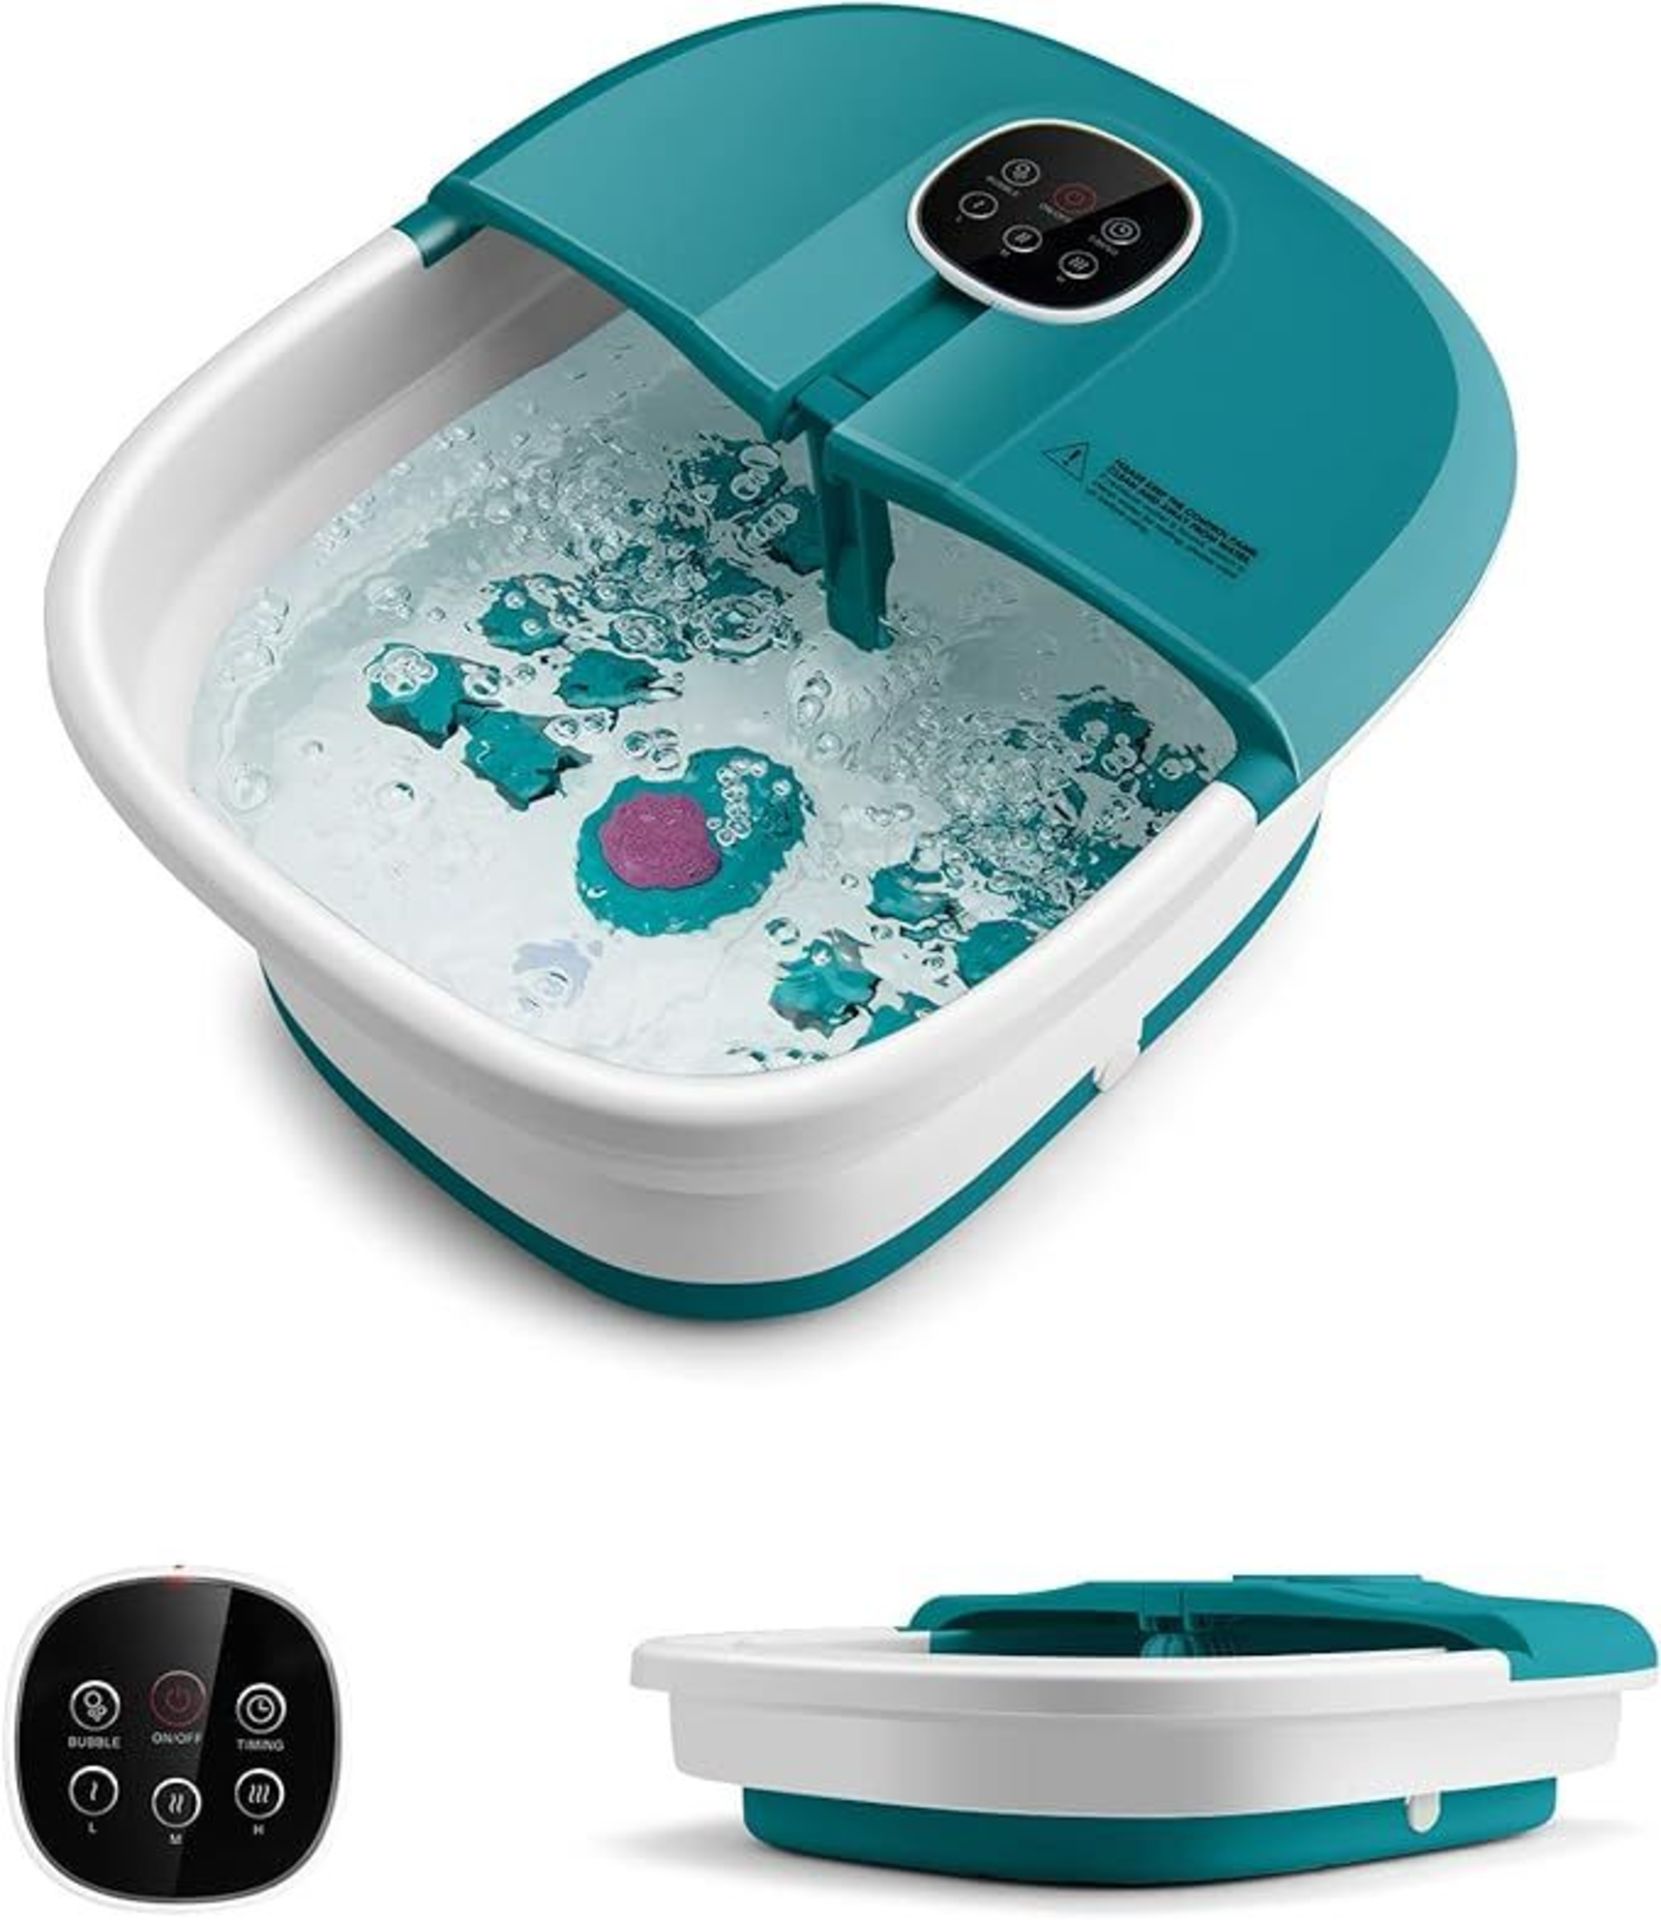 CASART Foot Spa Bath Massager, Foldable Heating Foot Soaker with Bubbles & Timing Function, 8